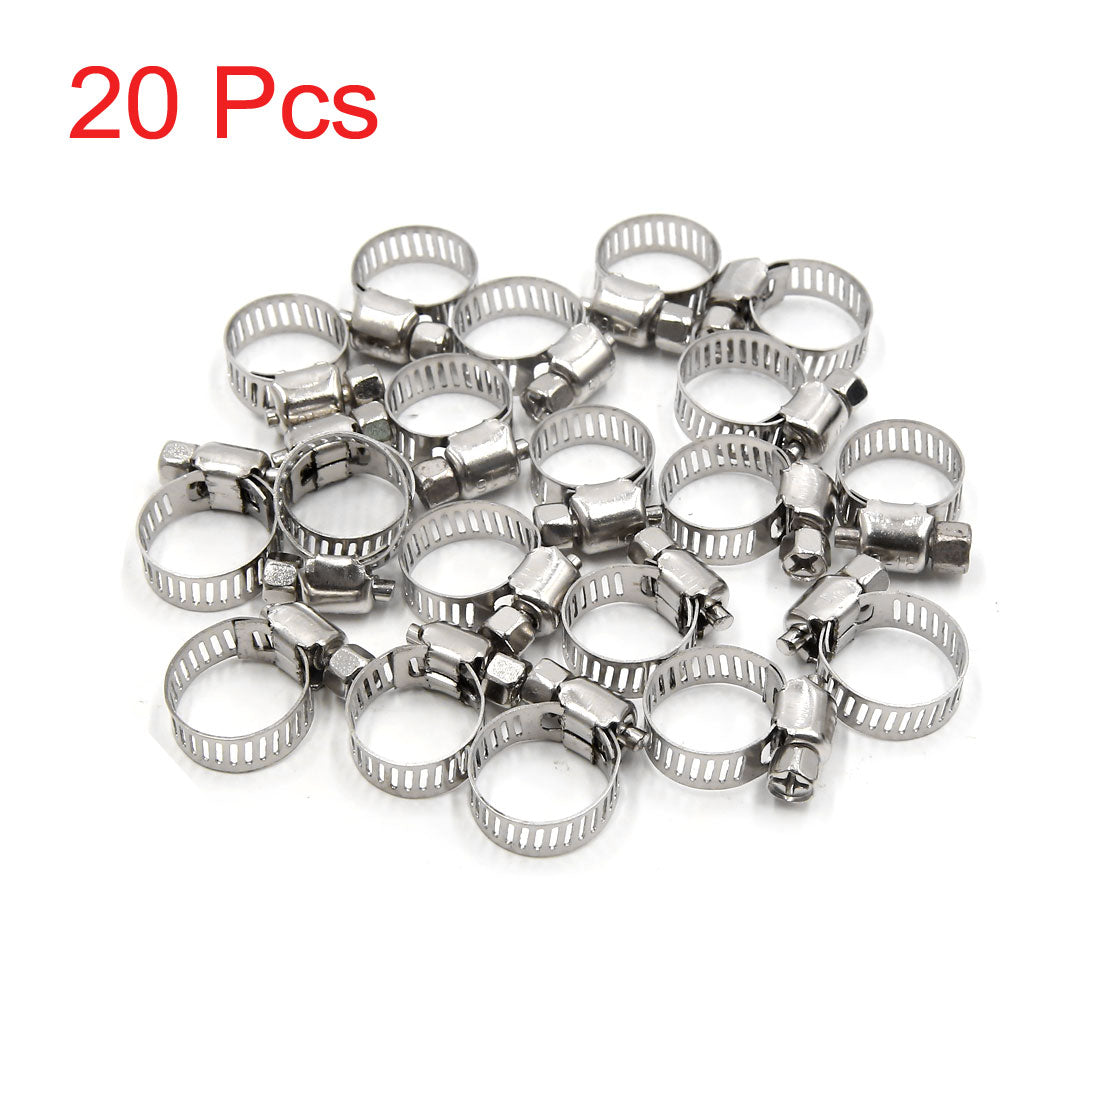 uxcell Uxcell 20Pcs 9-16mm Metal Adjustable Drive Hose Clamp Fuel Line  Clip for Car